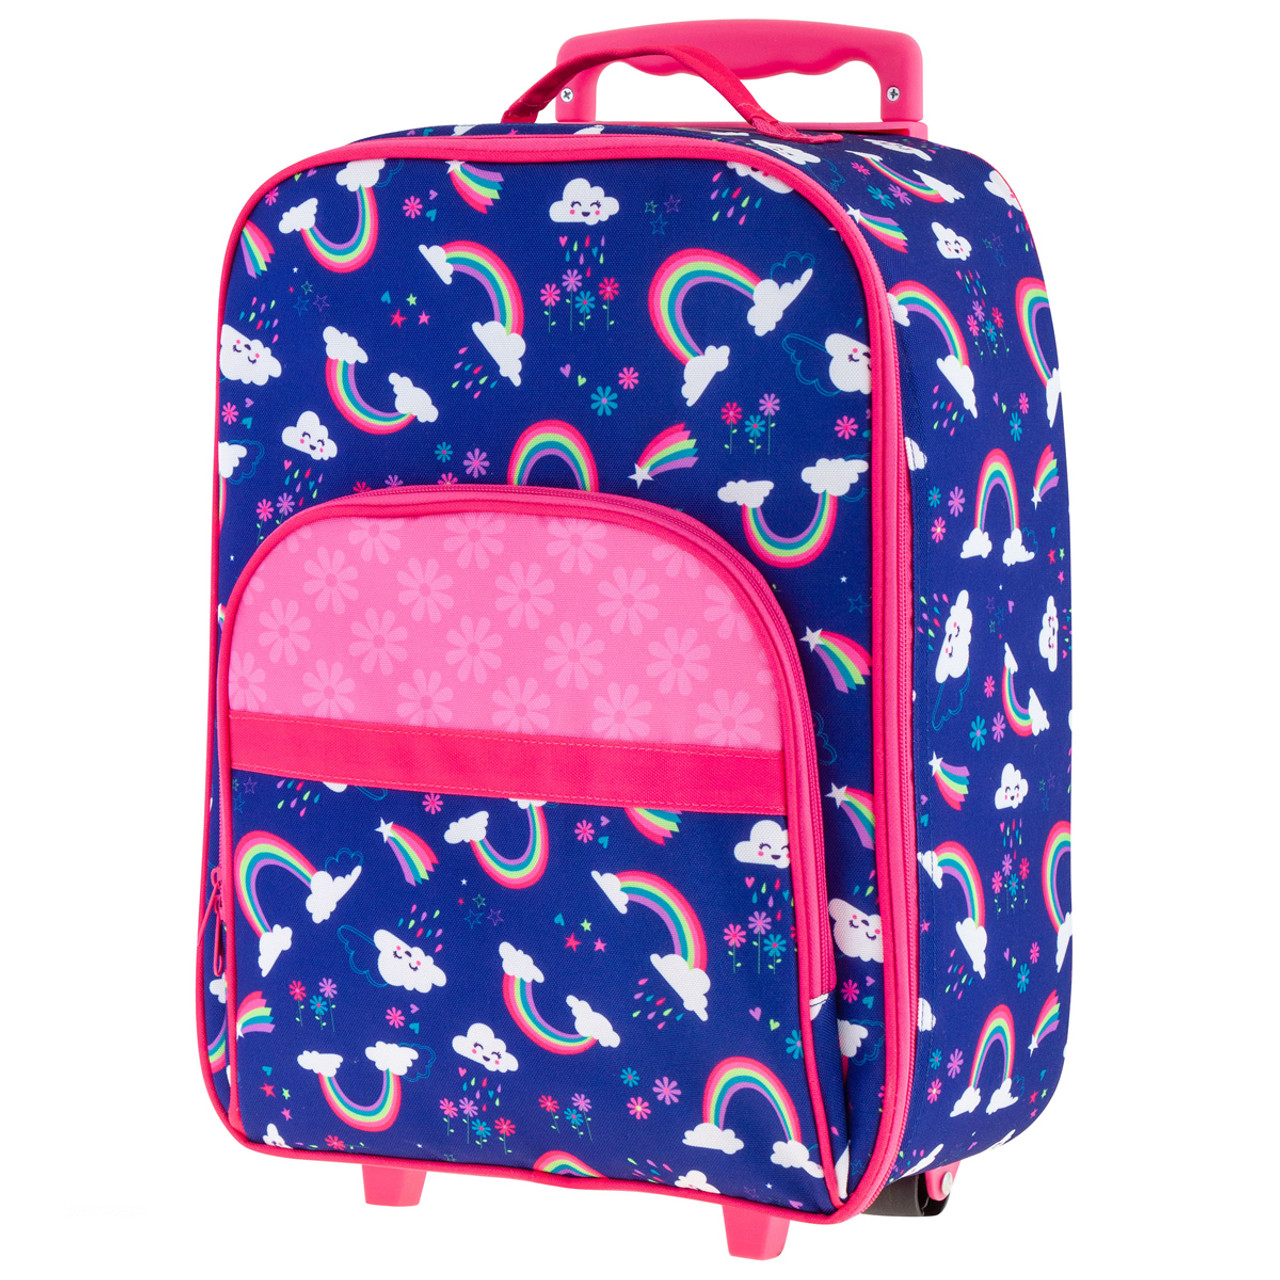 Kids Suitcase, Rolling Luggage with Wheels for Girls - Unicorn